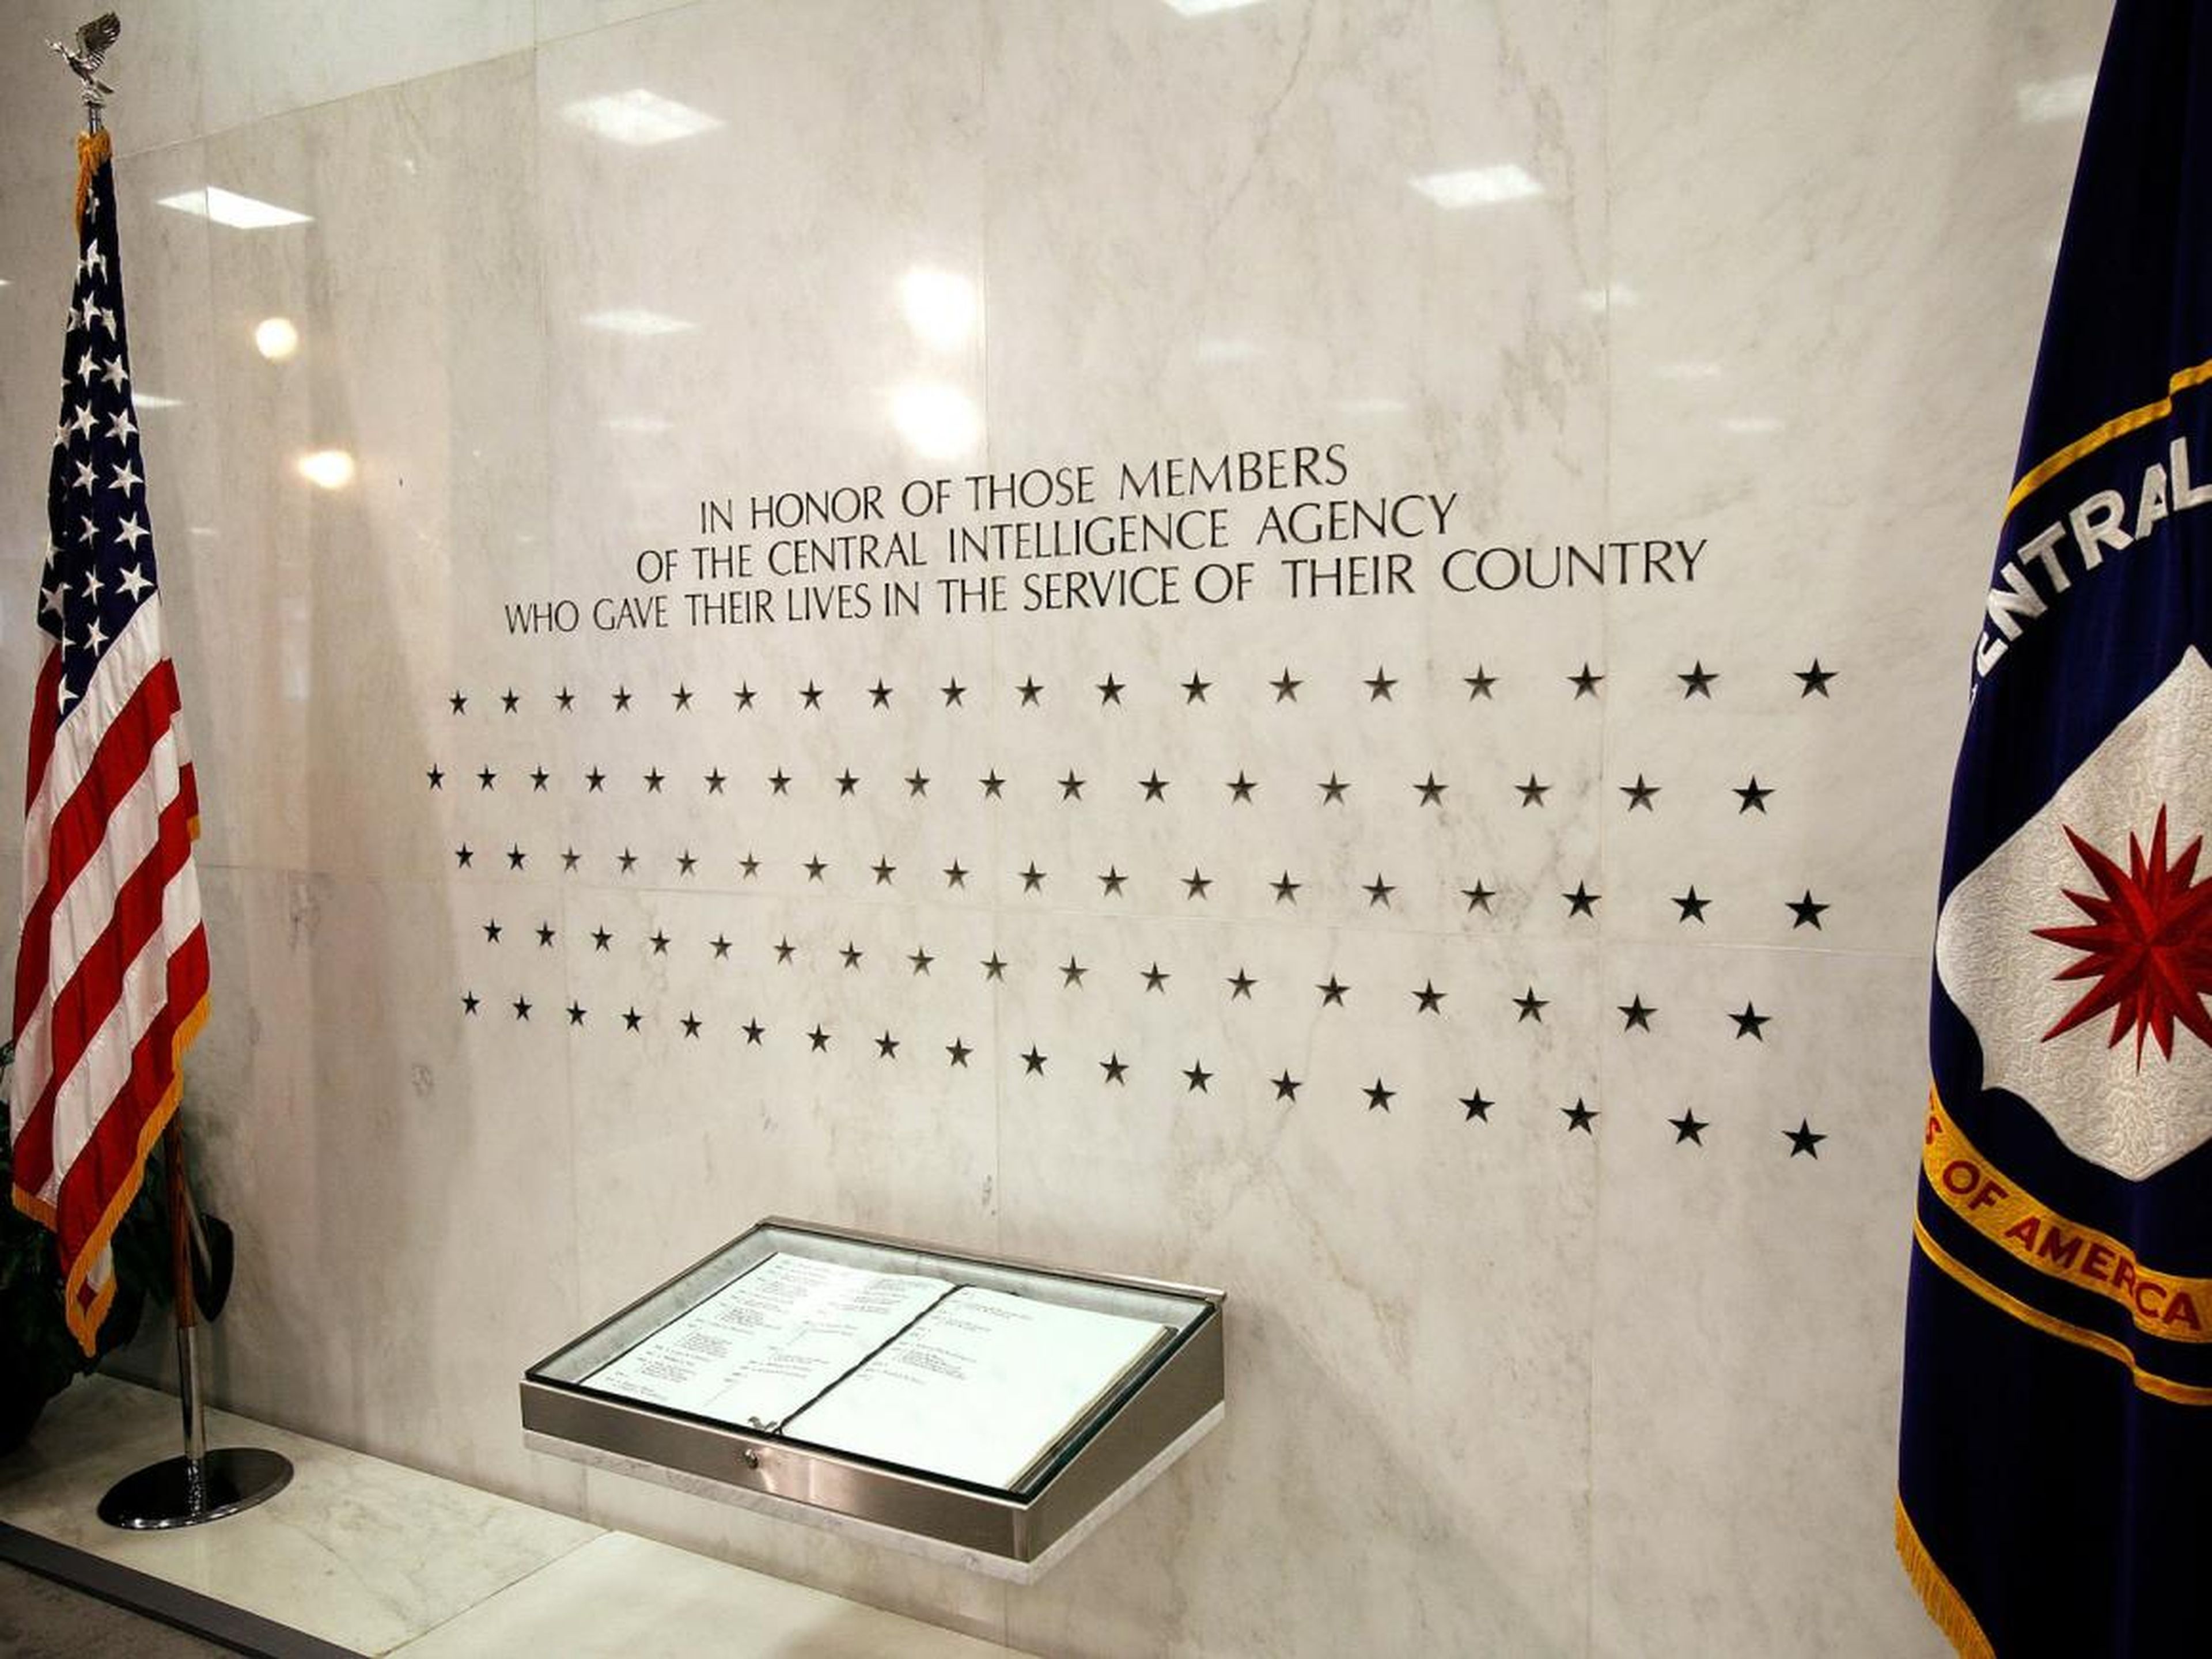 And it is true that espionage can be dangerous. There are 129 stars carved into the agency's memorial wall, each reflecting a CIA employee who lost their life in the line of duty.